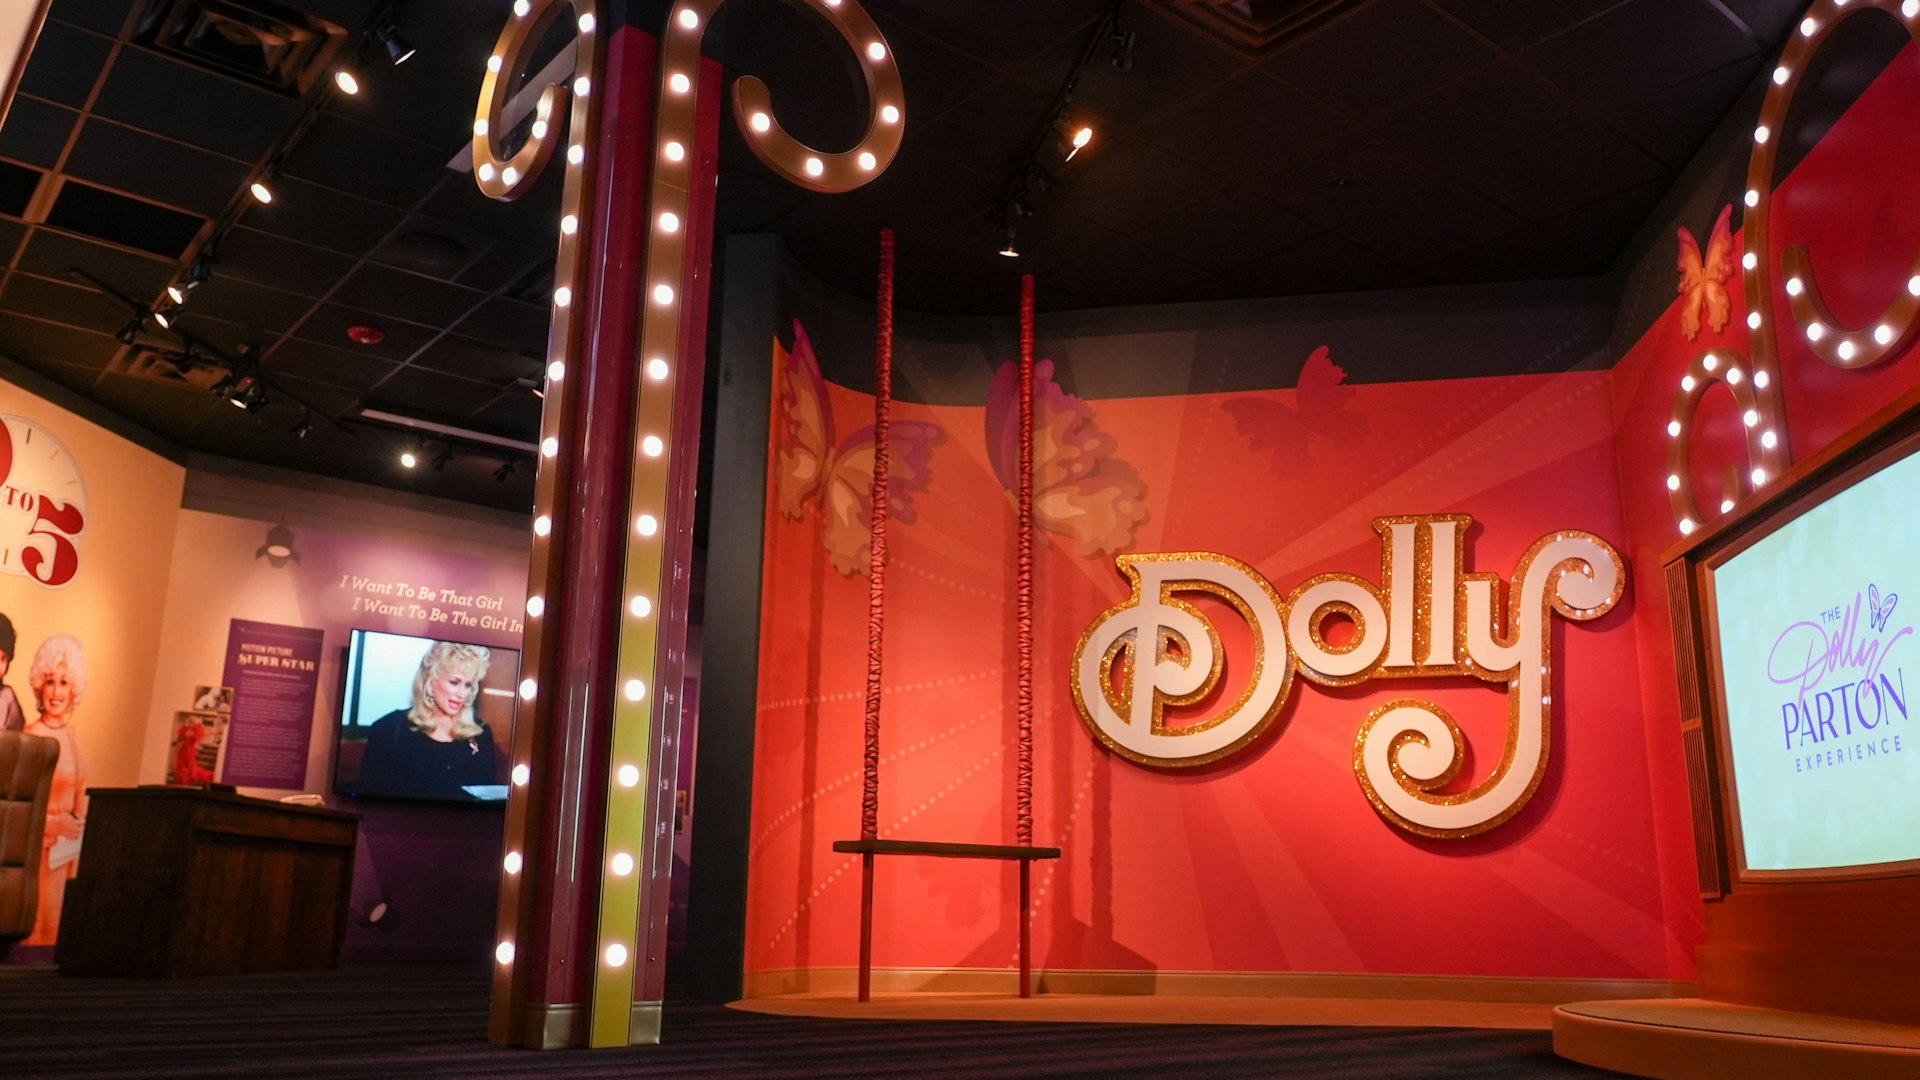 A large orange sign with "Dolly" written on it, next to a TV screen and interactive exhibits